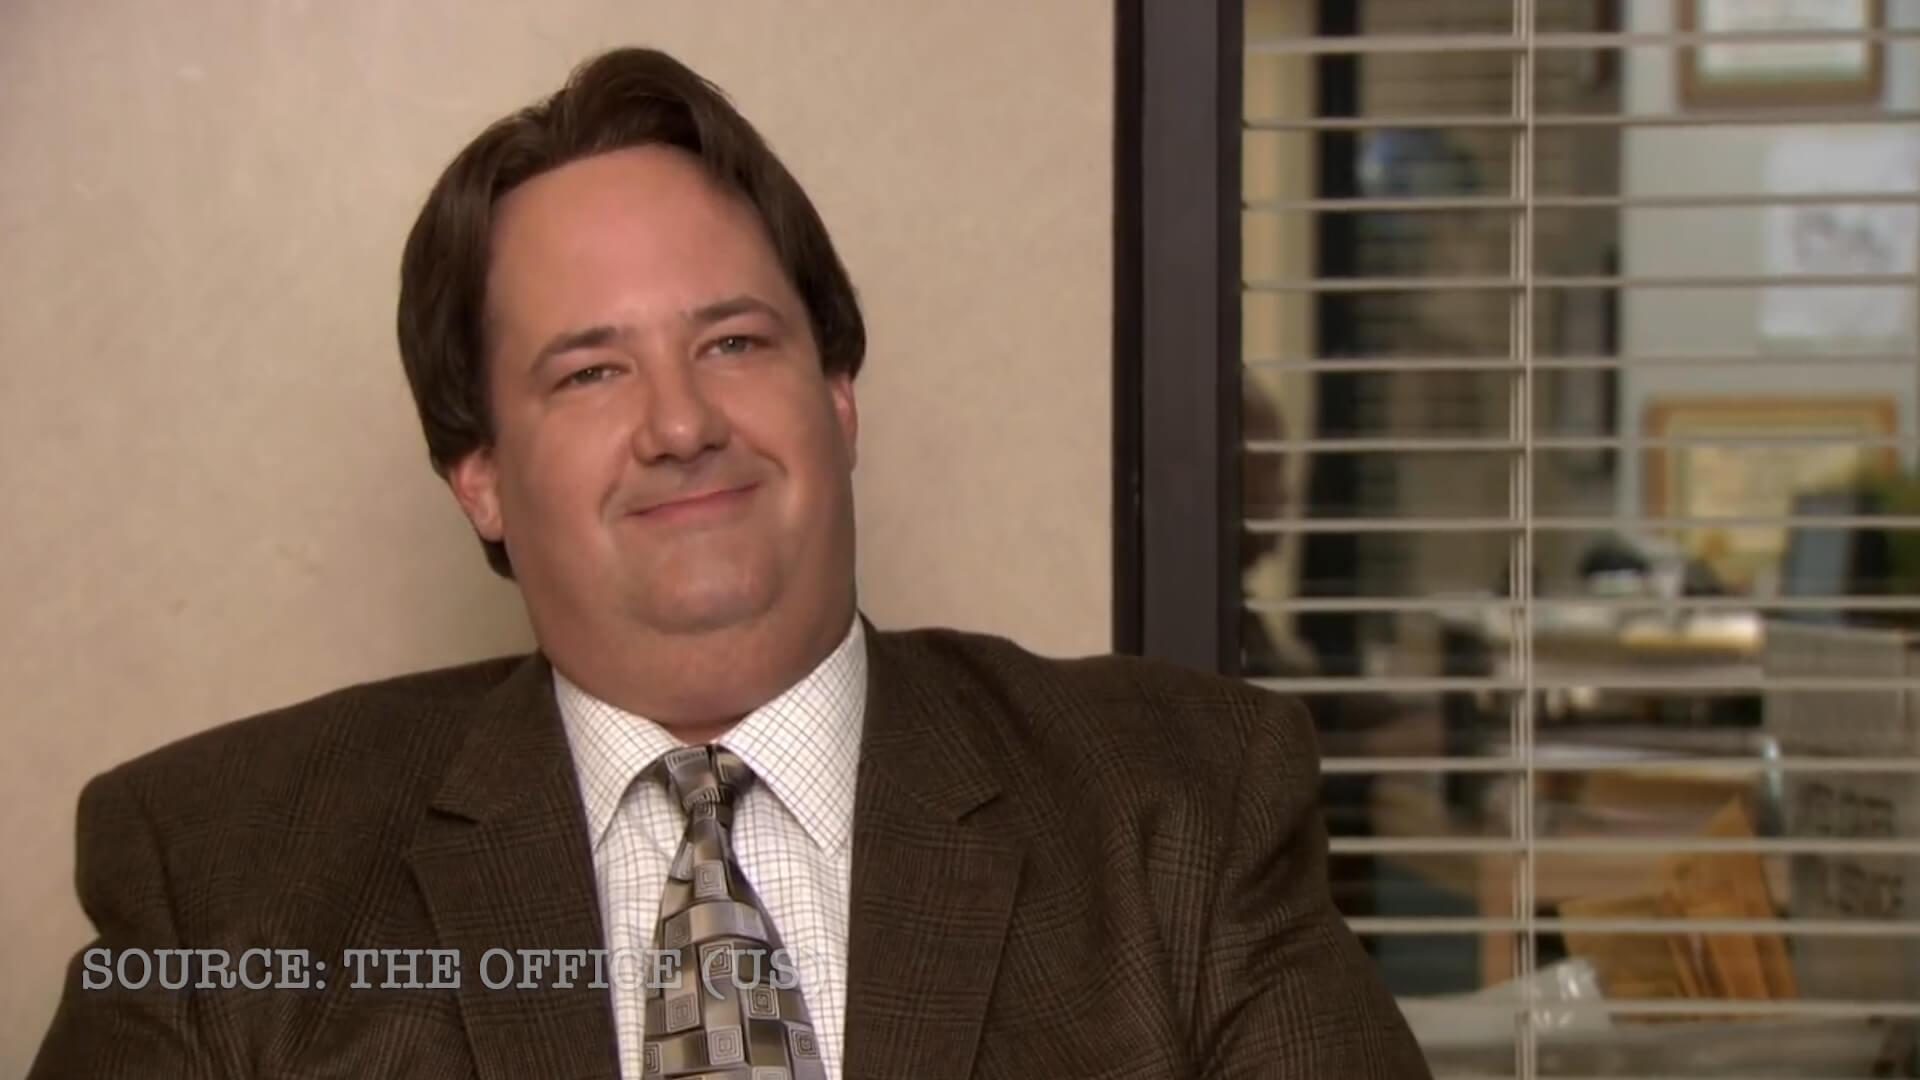 https://thestarvingchefblog.com/wp-content/uploads/2022/05/kevin-malone-the-office.jpg